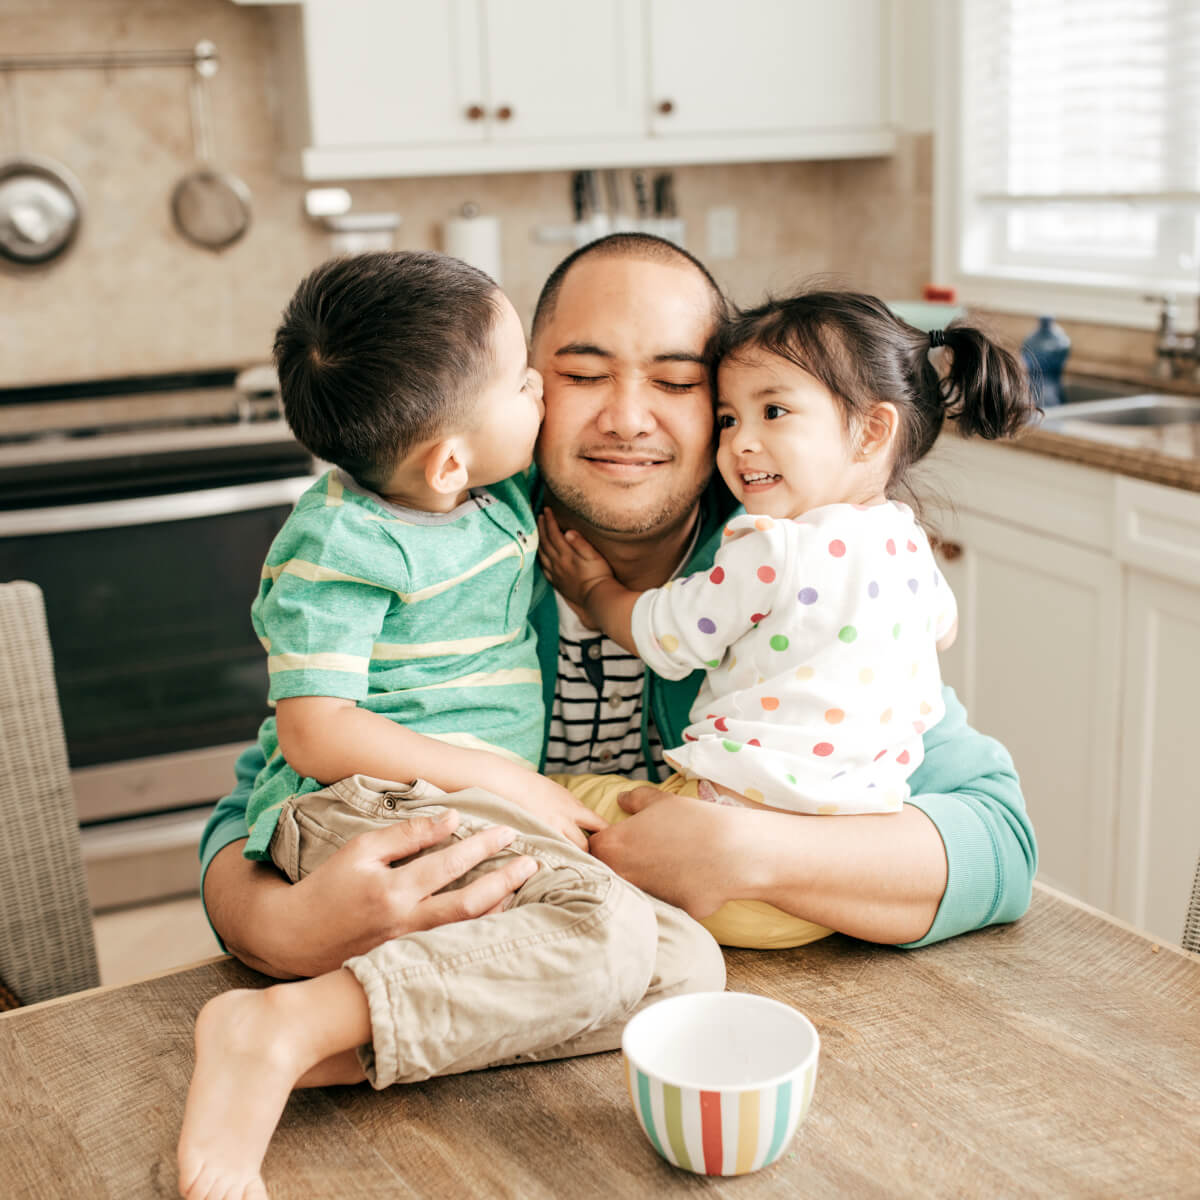 Dad in kitchen with kids sitting on table and giving him a hug